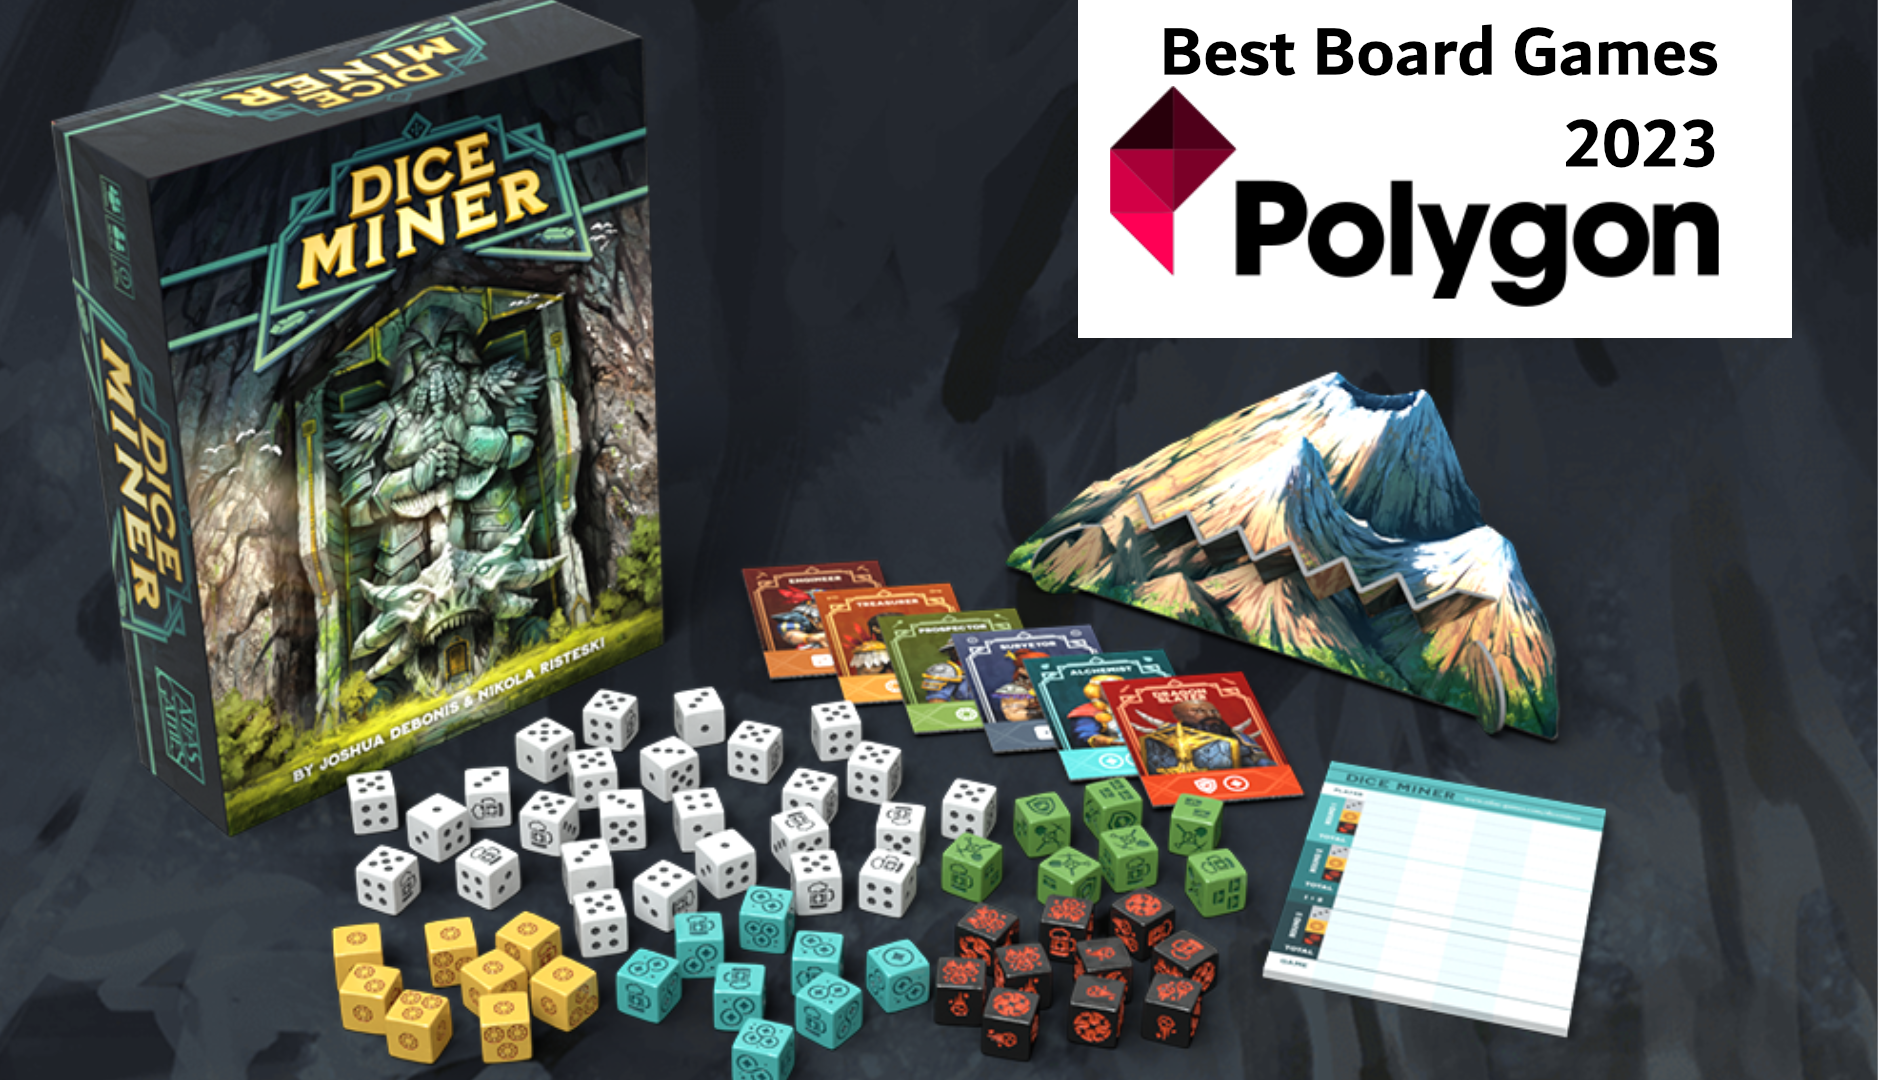 Dice Miner is Polygon Best Game of 2023!